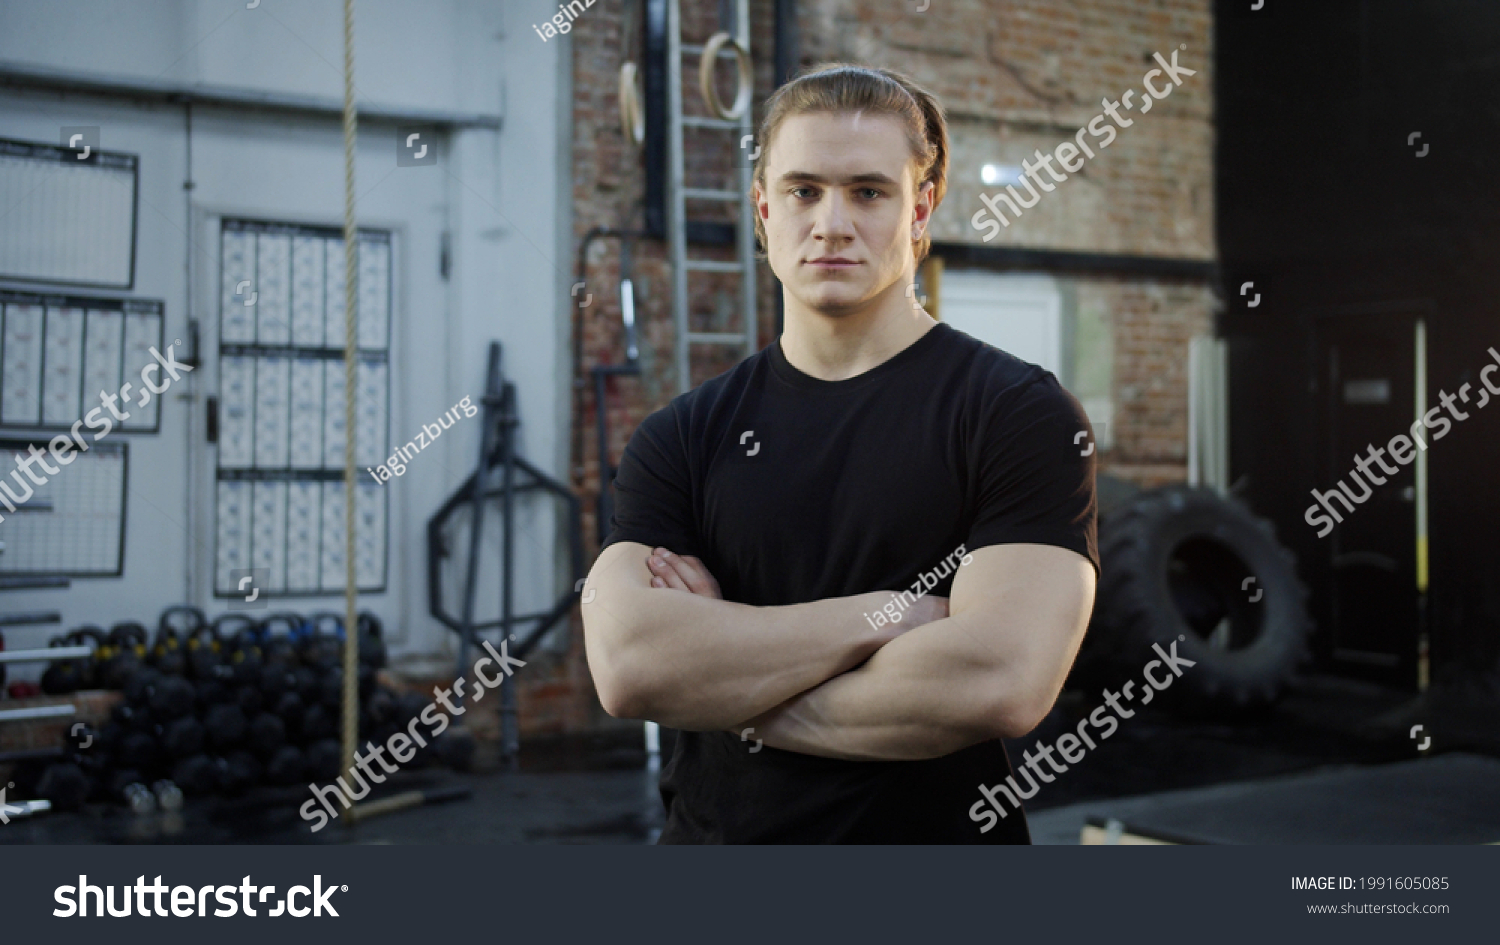 Muscle arms crossed Images, Stock Photos & Vectors | Shutterstock